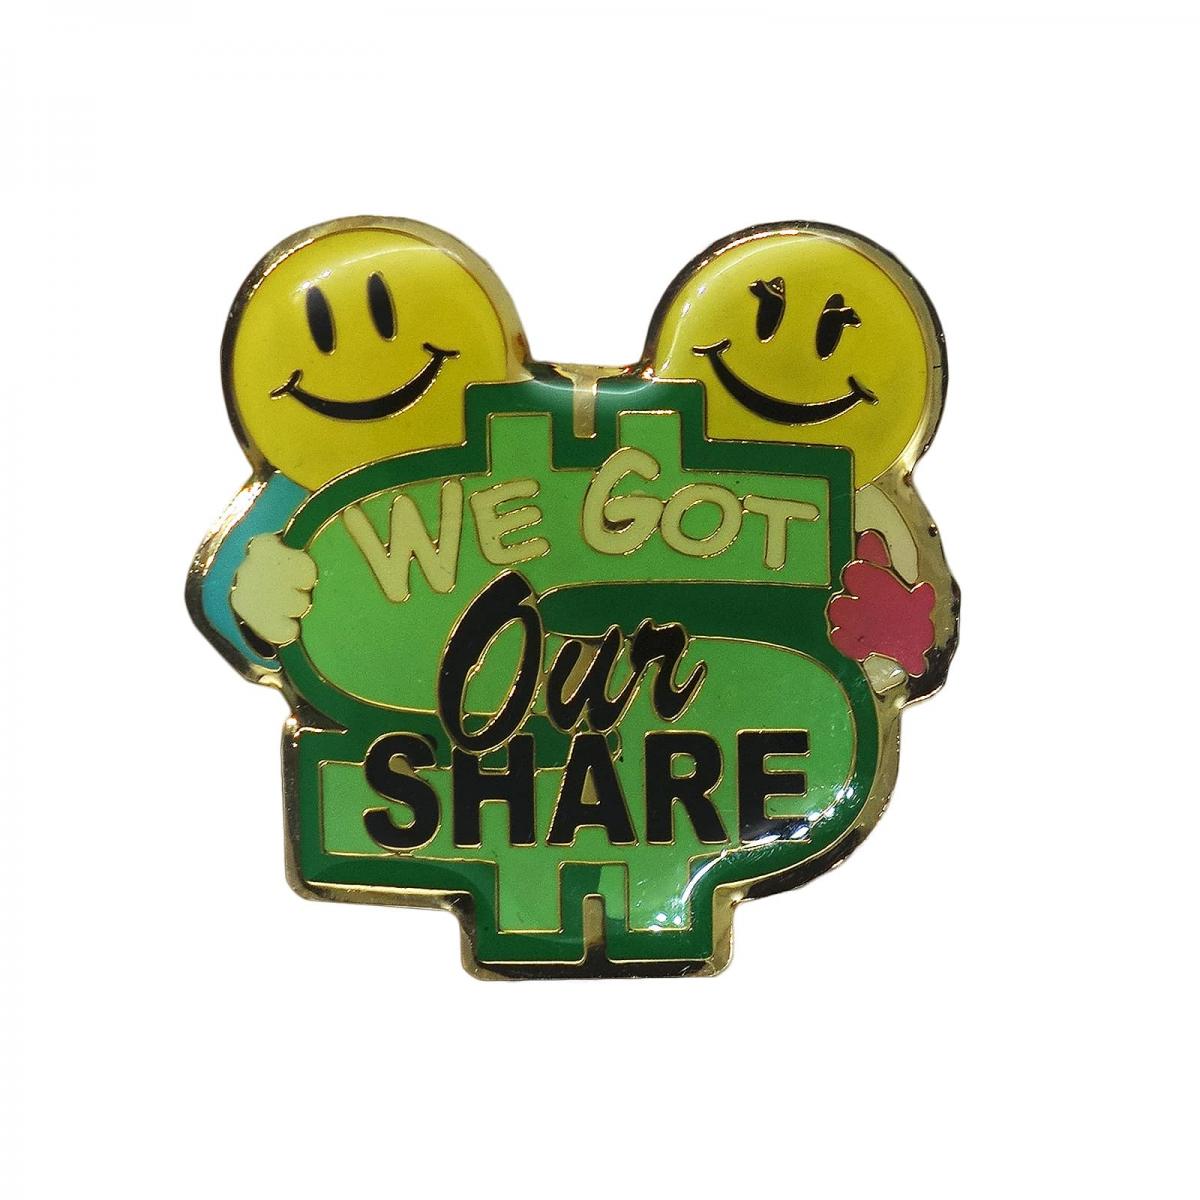 WE GOT Our SHARE ピンズ Walmart 留め具付き ニコちゃん